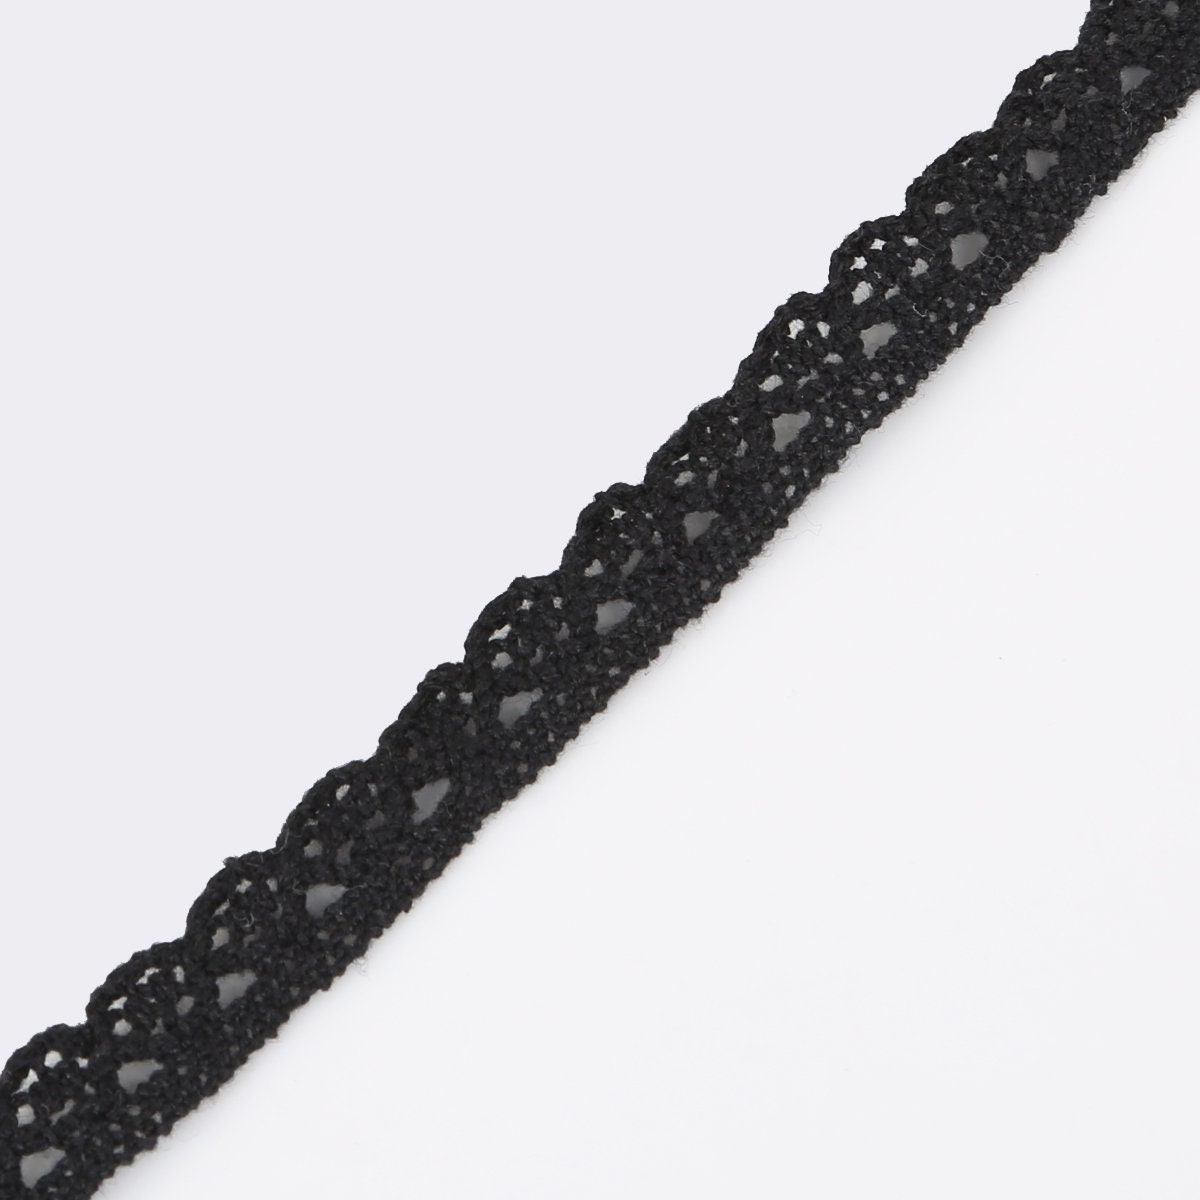 Handmade Black Lace Ribbon For DIY Vxxxv Apparel 2021 Price, Wedding,  Birthday Party, Scrapbooking, Necklace, Skirt, And Dress Decoration From  Pengff0809, $48.89